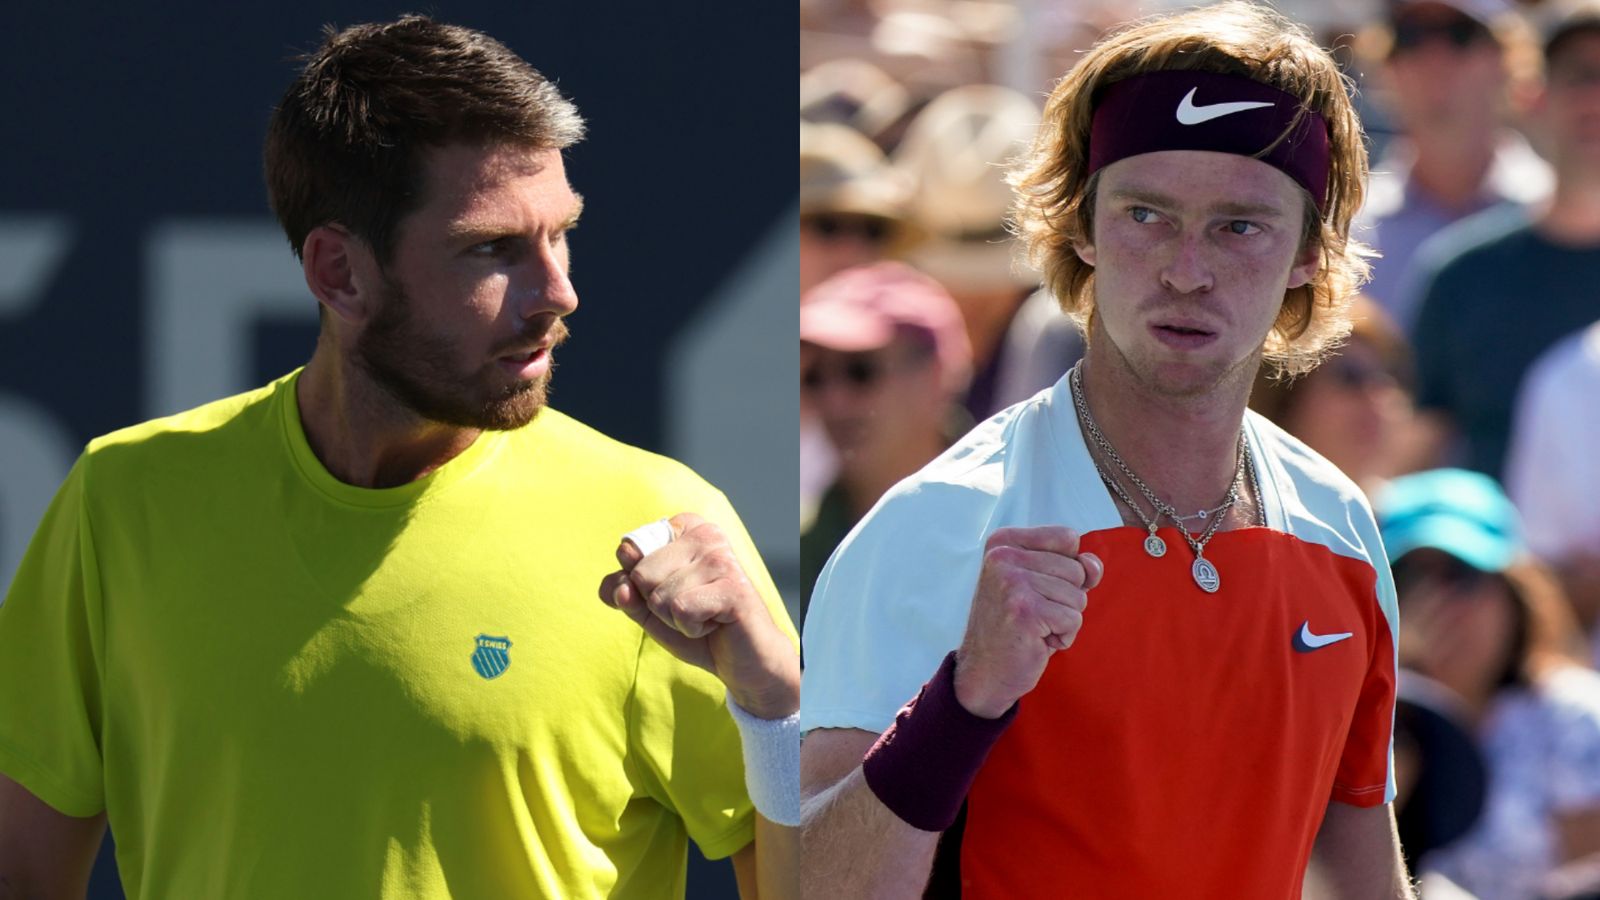 US Open Cameron Norrie last Brit standing in singles draw and next faces Andrey Rublev Tennis News Sky Sports